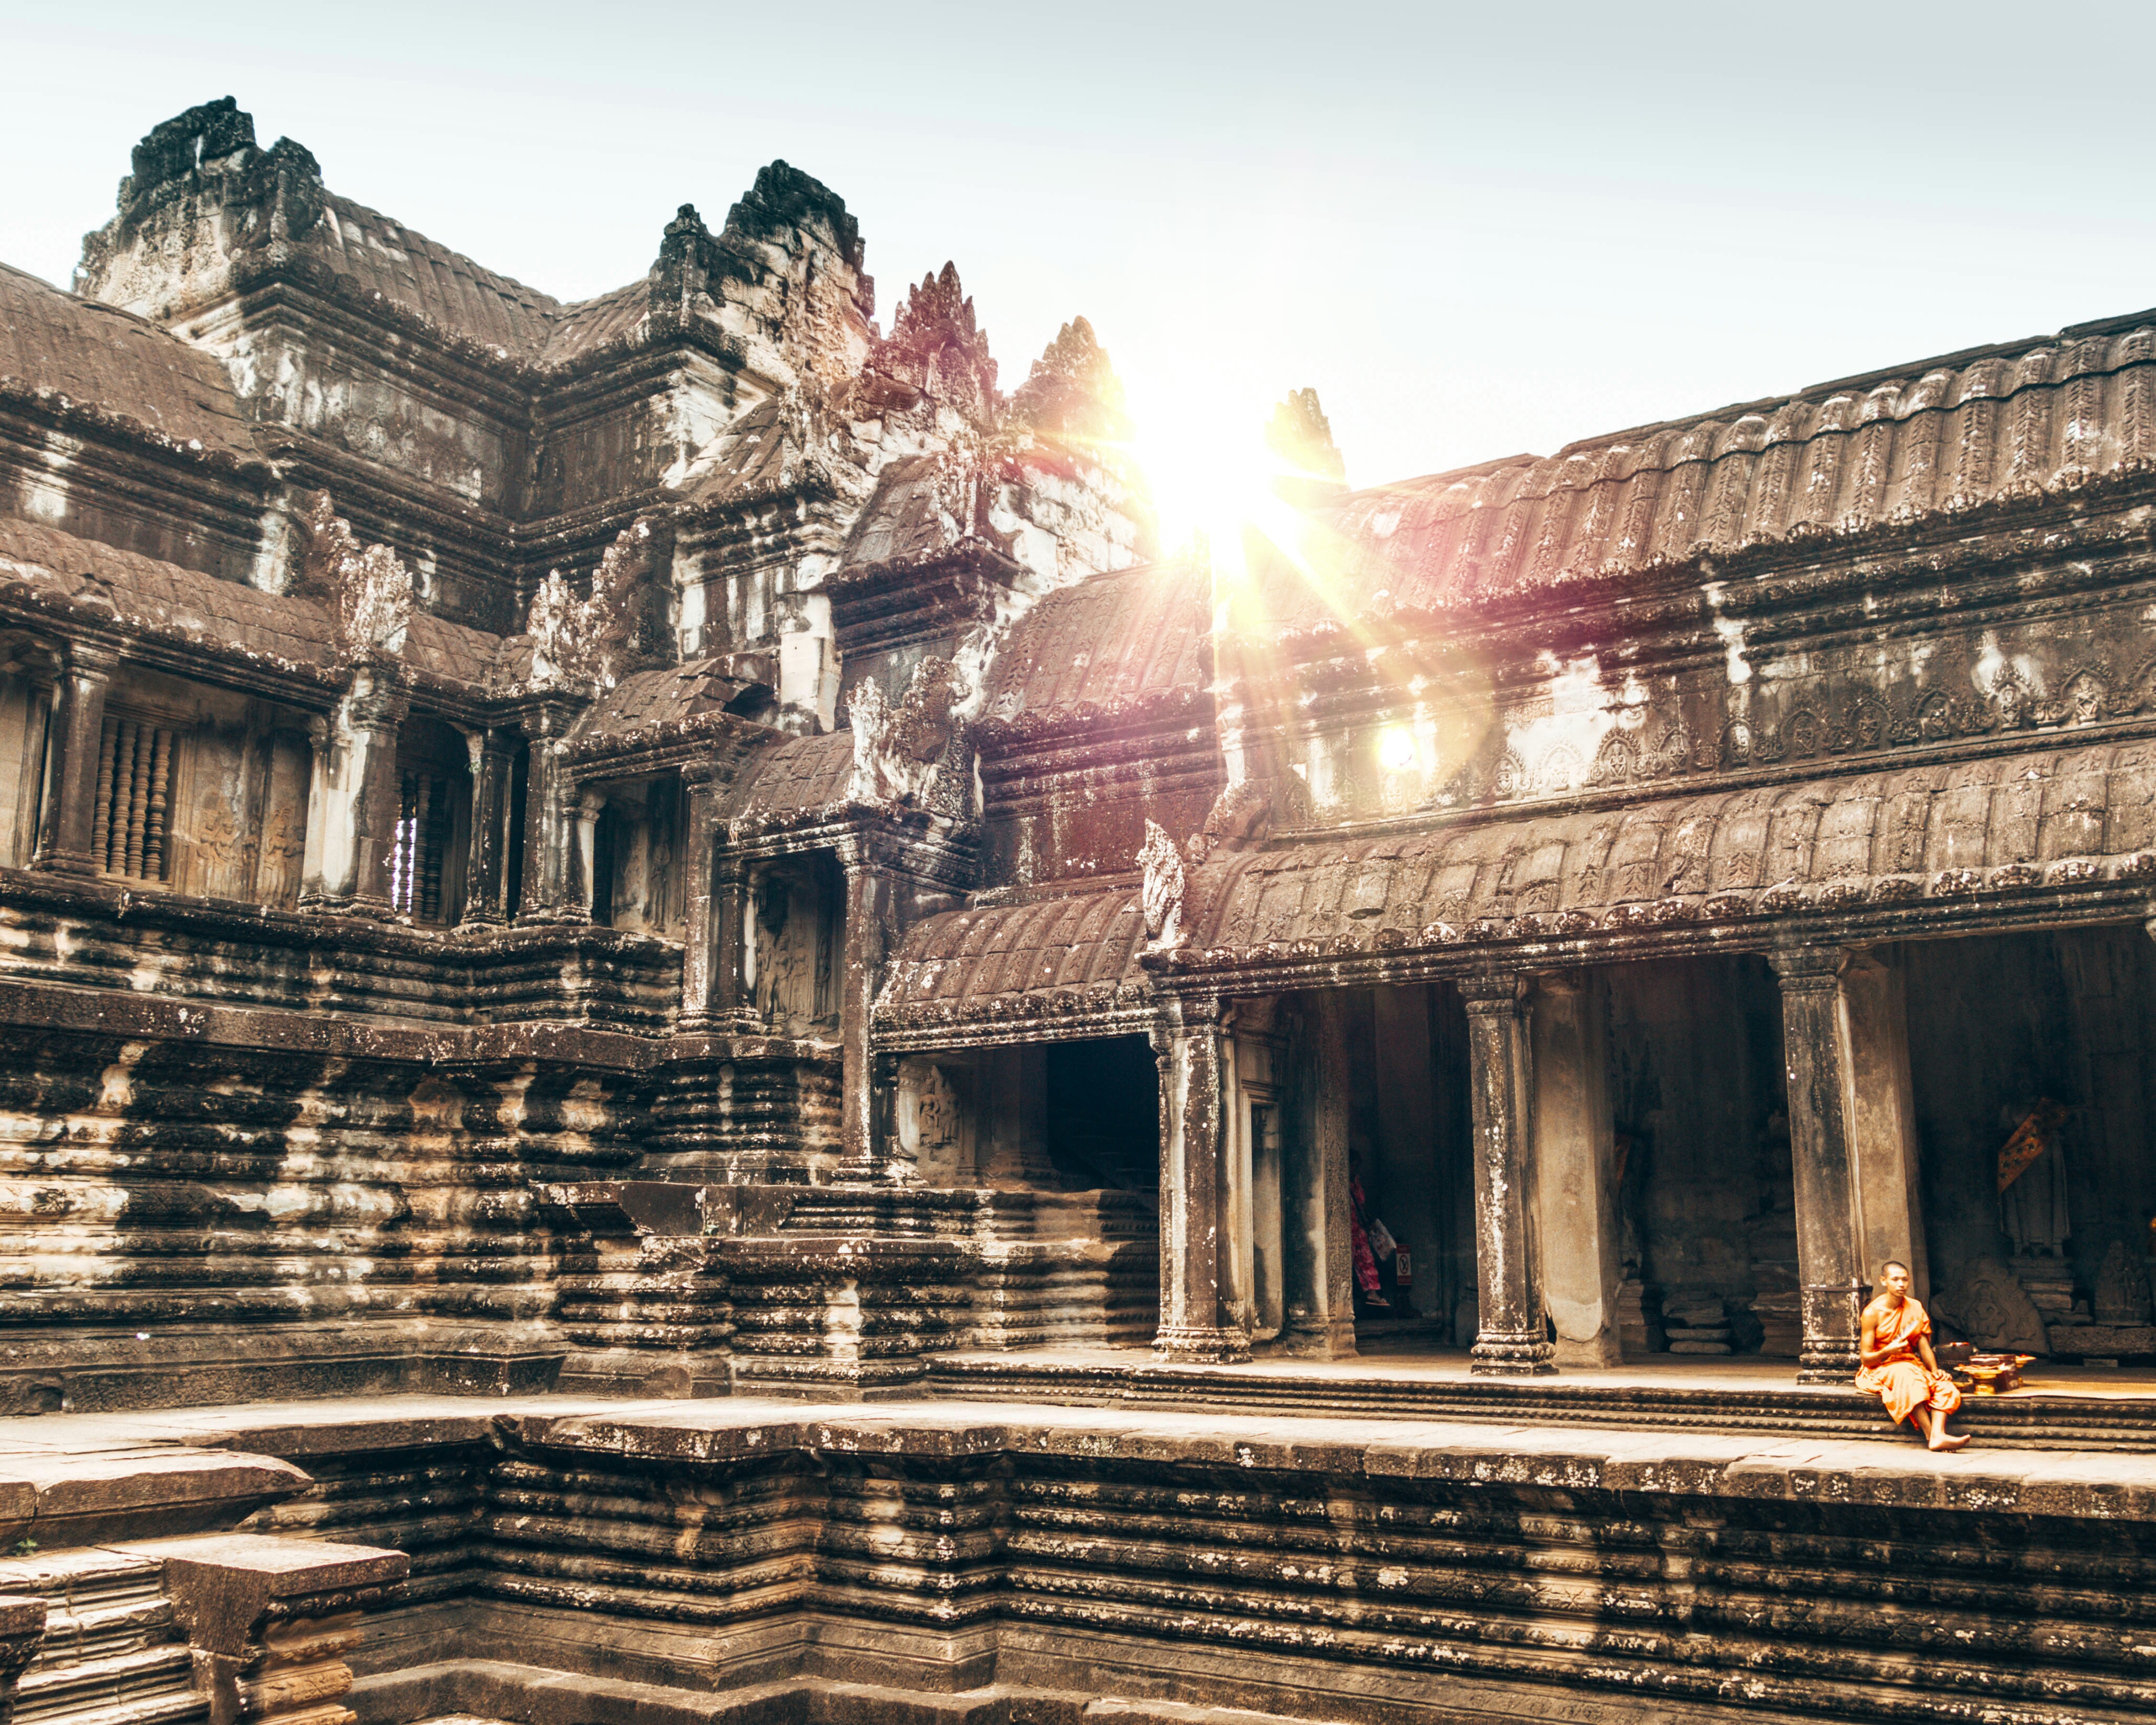 The best tips to know before visiting the Angkor Wat Temples